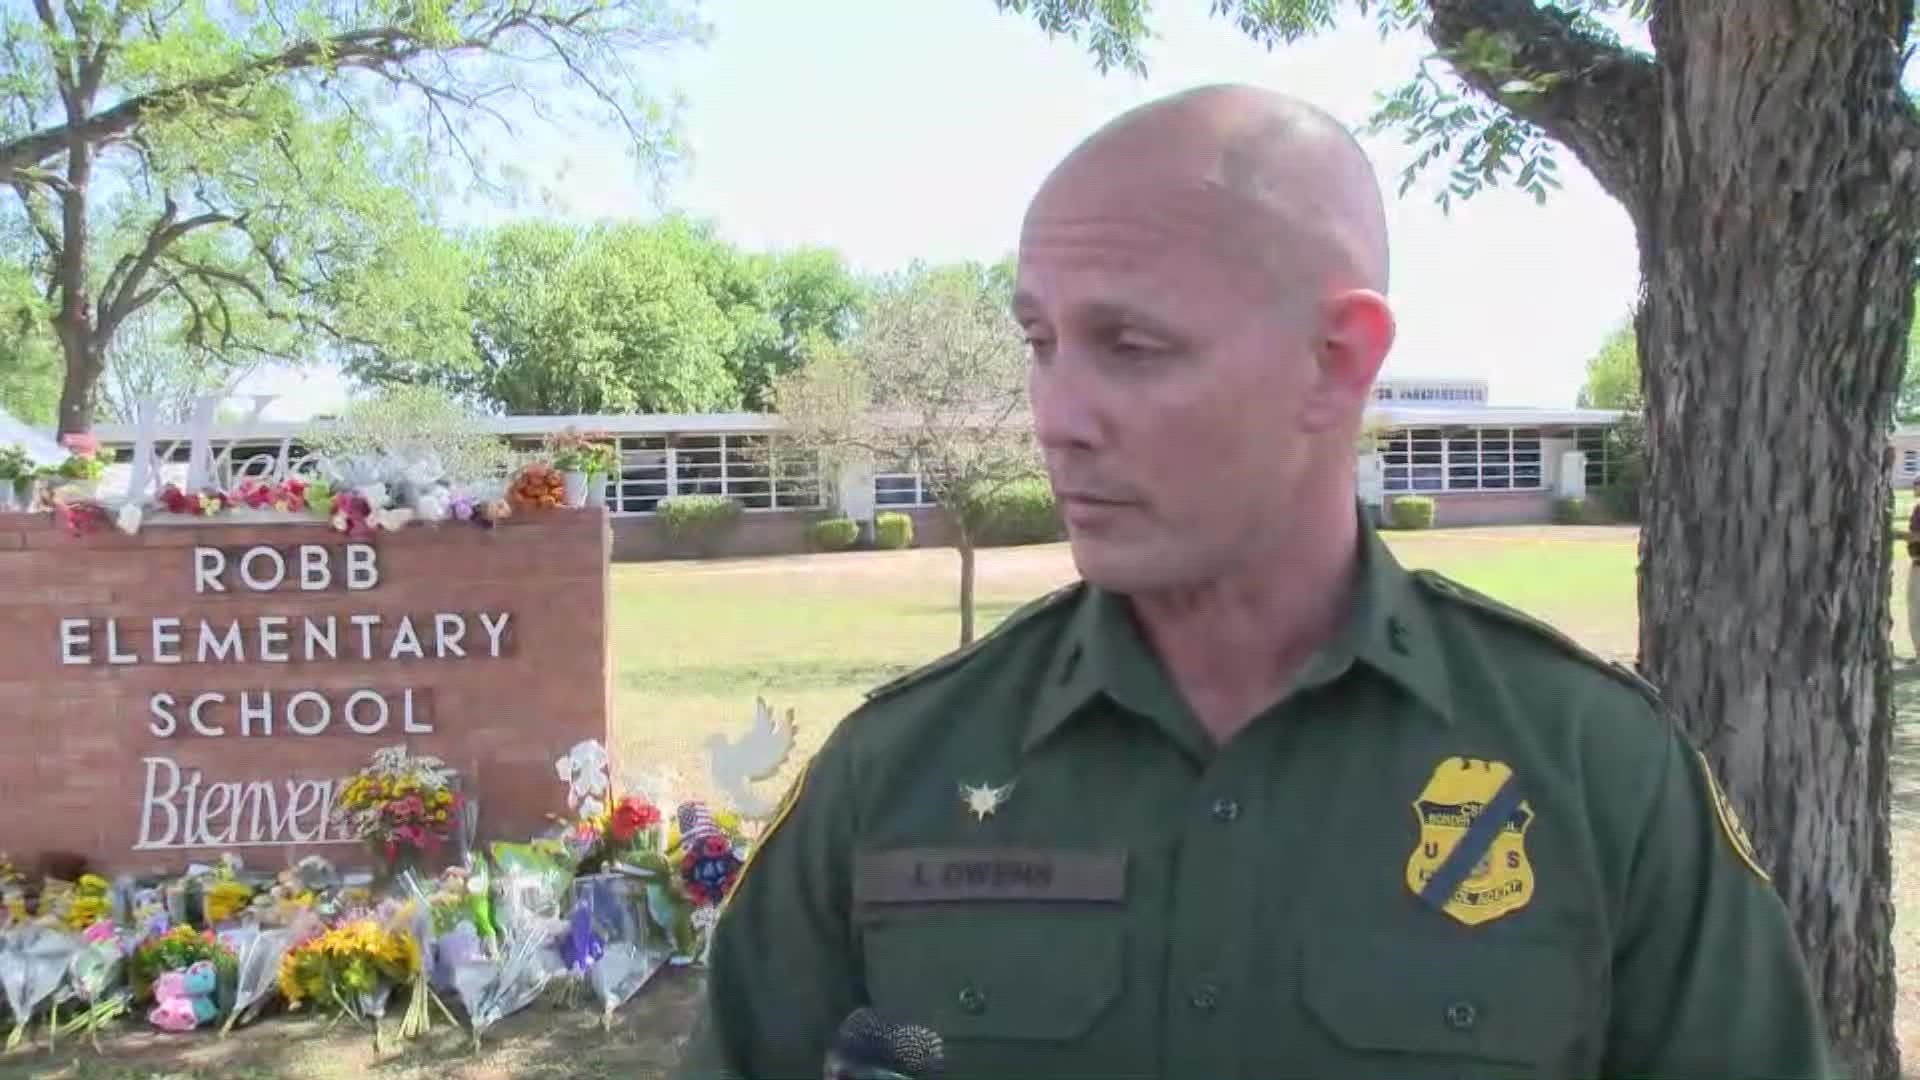 "This is their home, they have children who go to this school," Del Rio Border Patrol Chief Jason Owens said.